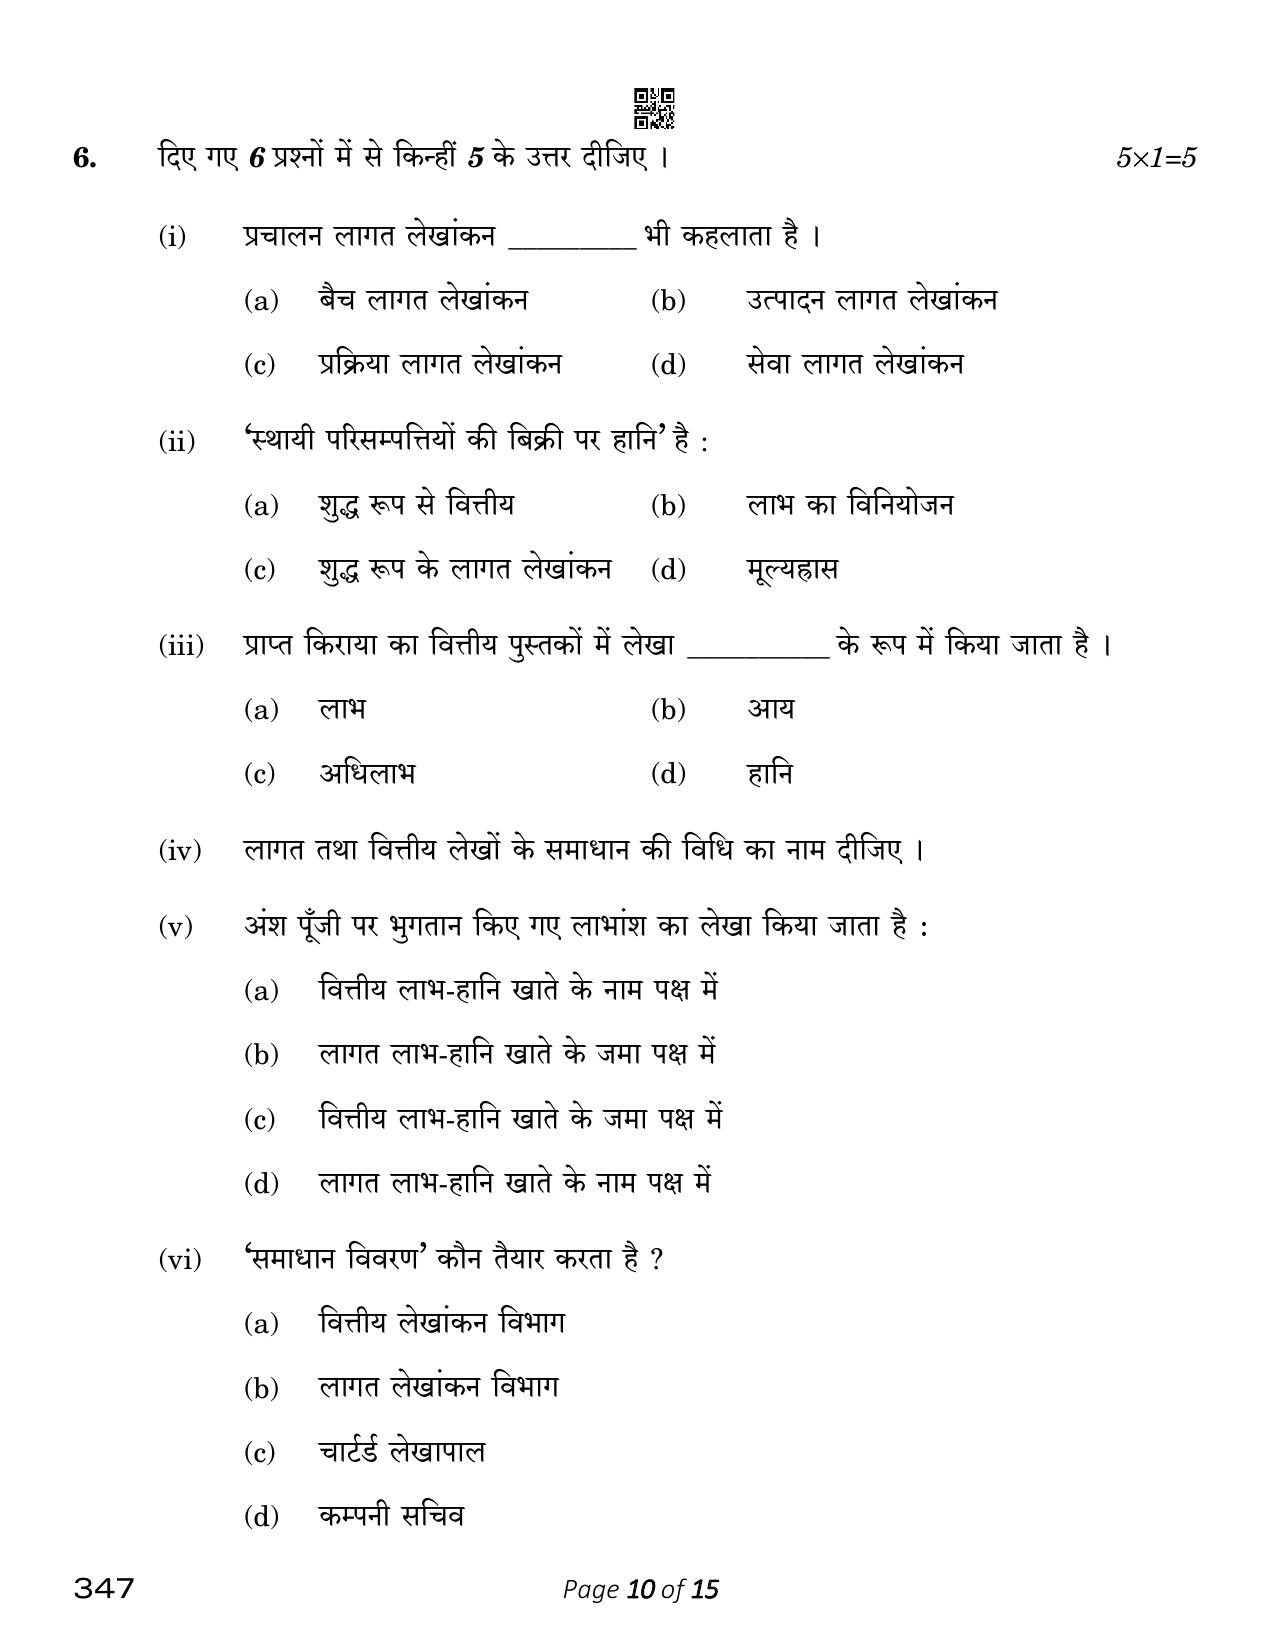 CBSE Class 12 Cost Accounting (Compartment) 2023 Question Paper - Page 10